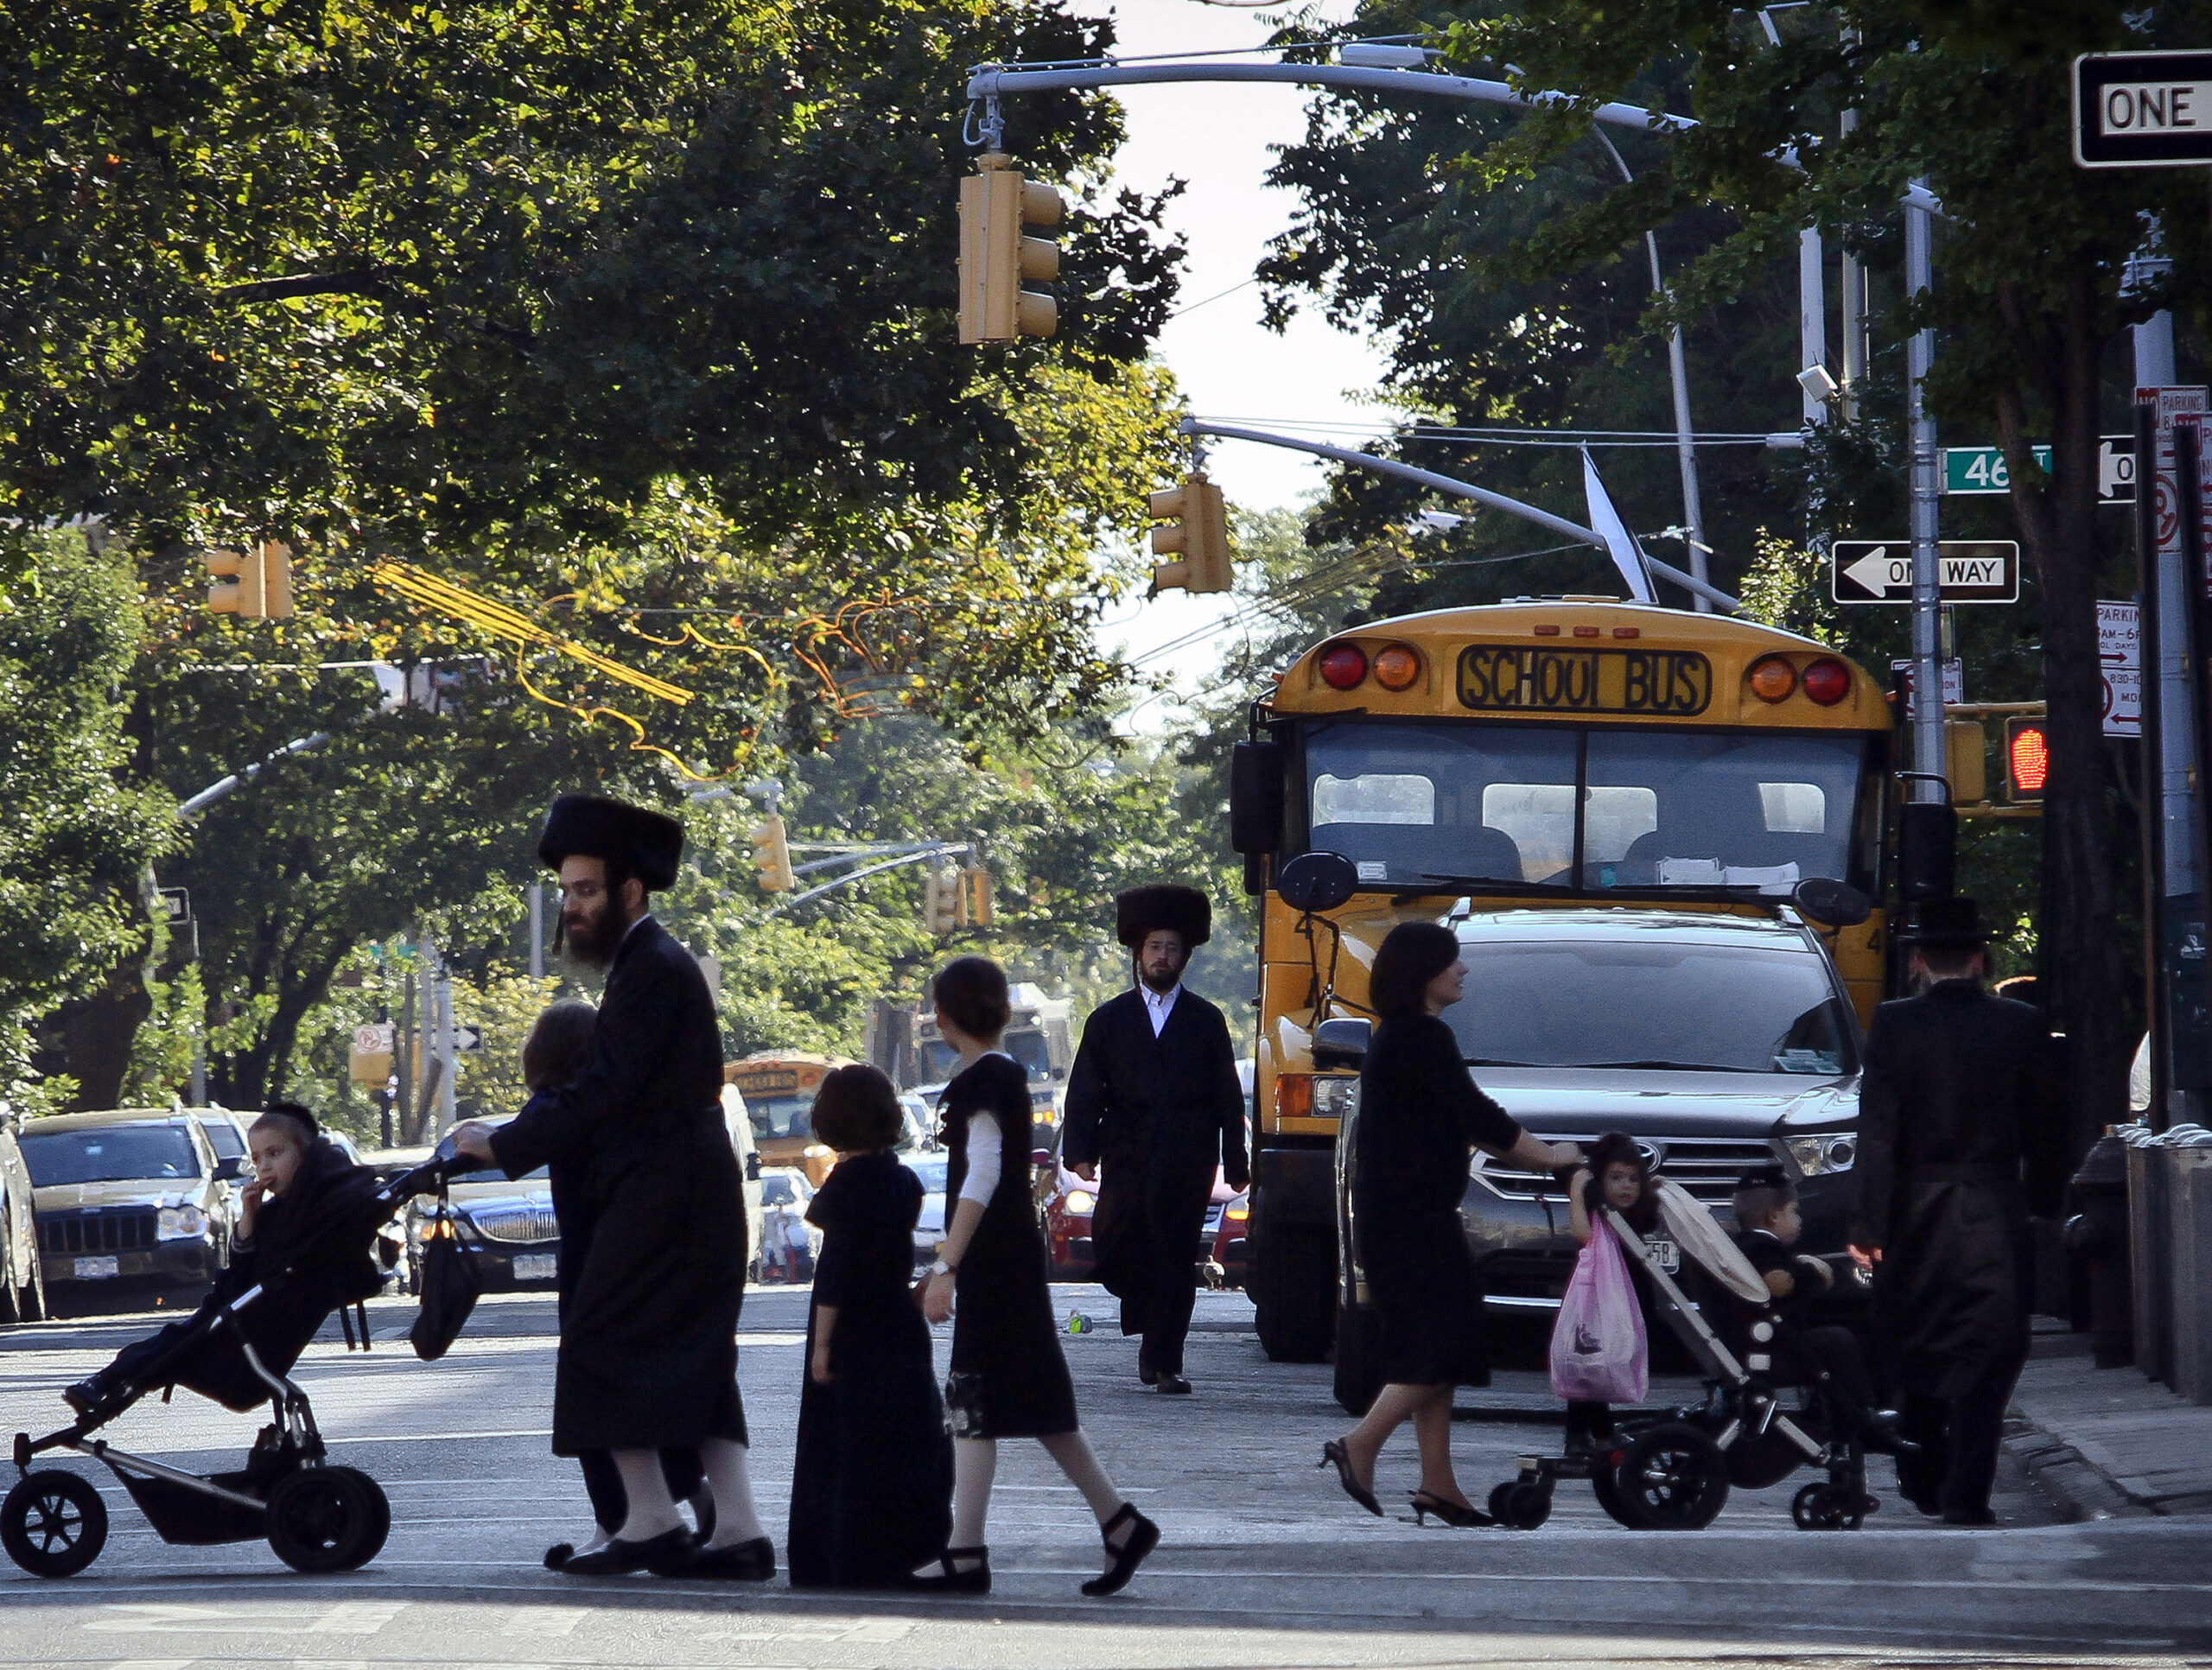 FILE - In this Sept. 20, 2013 file photo, children and adults cross a street in front of a school bus in Borough Park, a neighborhood in the Brooklyn borough of New York that is home to many ultra-Orthodox Jewish families. Critics have charged for years that the rudimentary level of secular education at private yeshiva schools serving New York's Hasidic communities are deficient in teaching science, geography and math to grade school students. Now, for the first time, the city Department of Education is investigating more than three dozen of the schools to make sure their instruction is up to the most basic standards. (AP Photo/Bebeto Matthews, File)